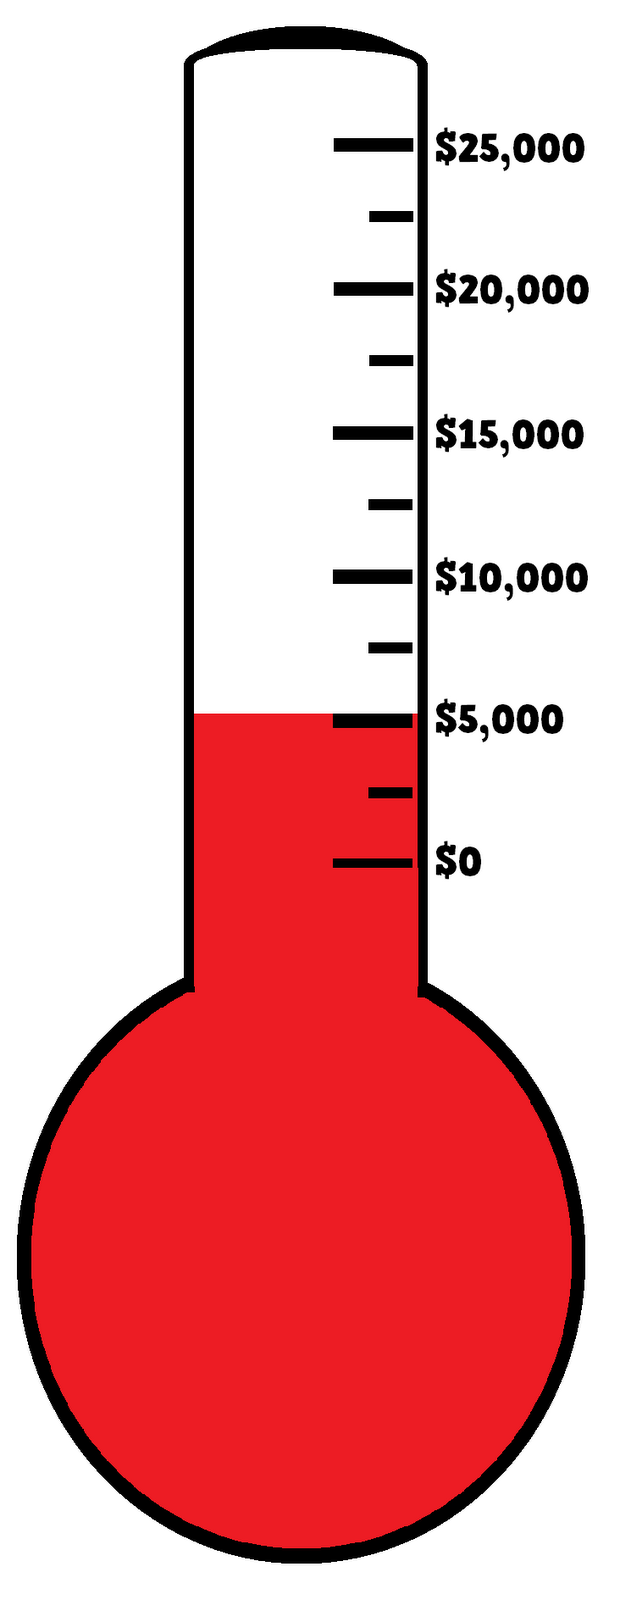 Photos of clip art thermometer fundraising chart 3 - Cliparting.com